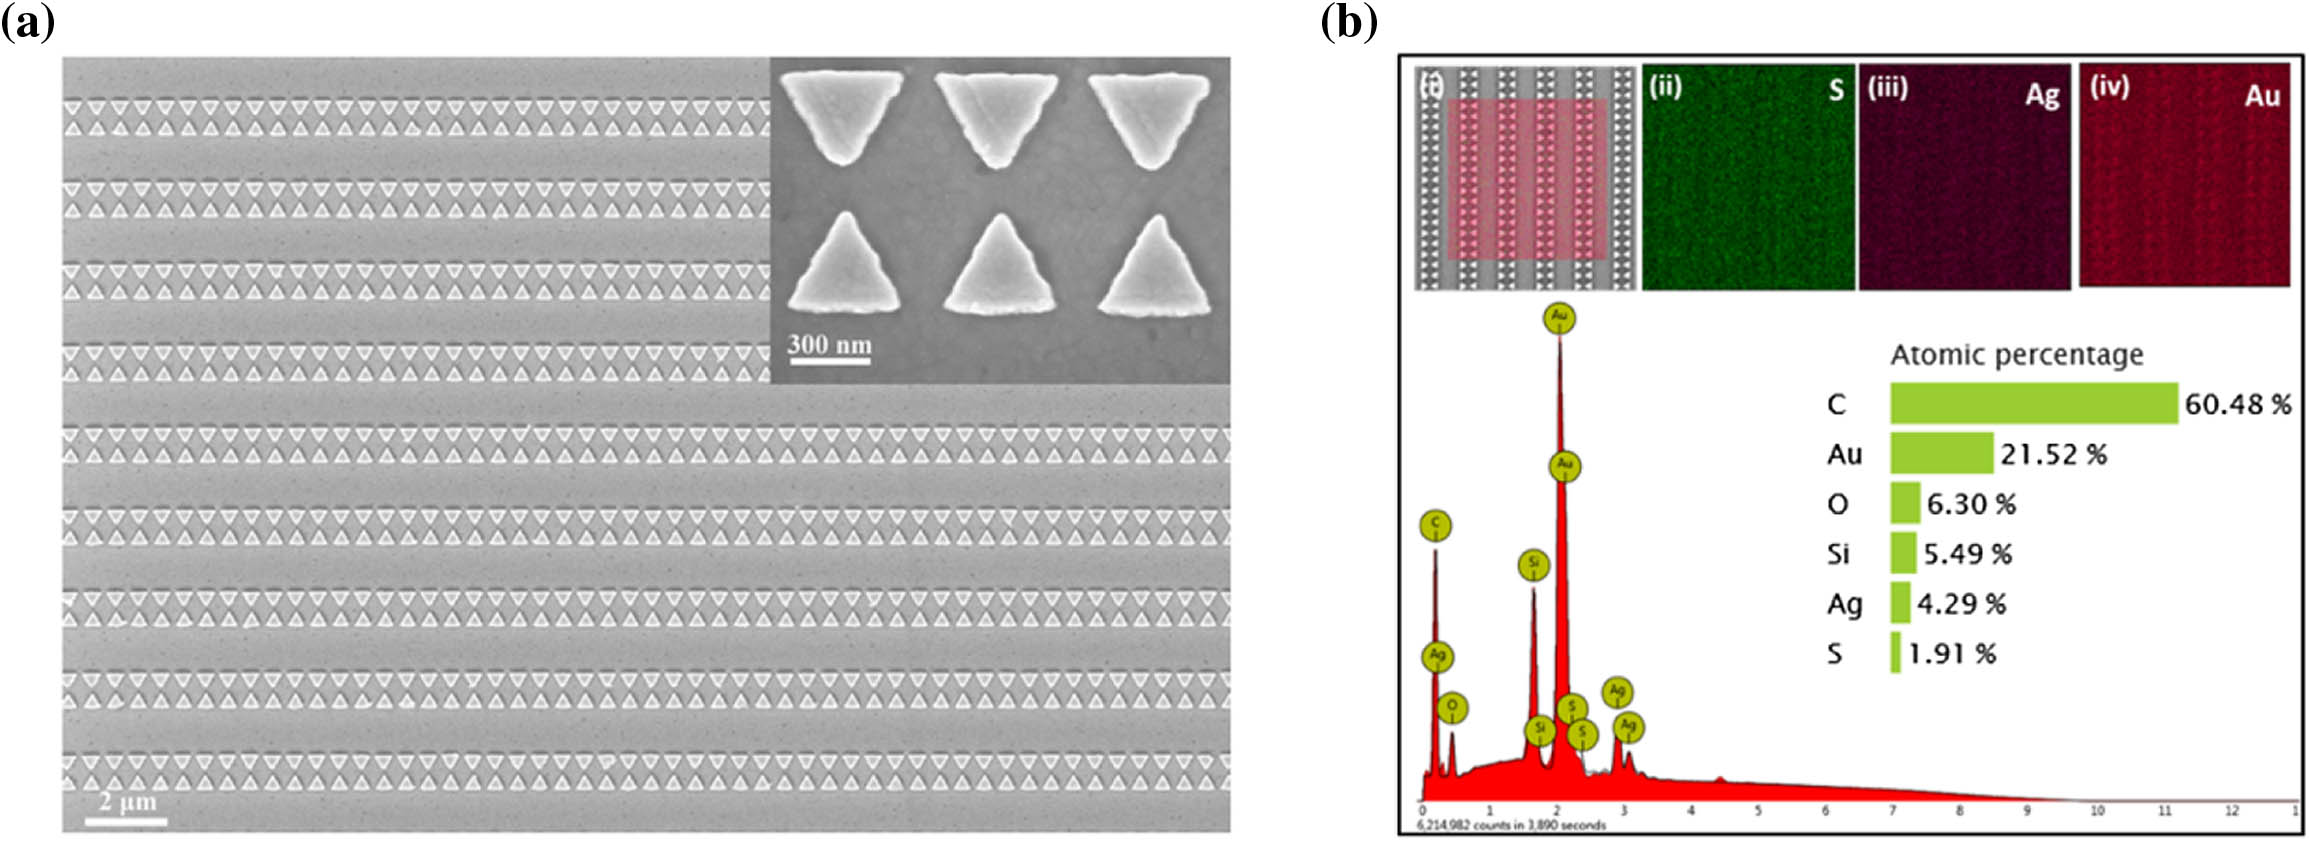 Characterization of Au BNA arrays. (a) SEM images of the BNA arrays (scale bar 2 μm). Inset shows an enlarged view of three pairs of BNA (scale bar 300 nm). (b) EDS analysis of Ag2S QDs on BNA arrays. On the top, from left to right: (i) scanned region for EDS, and elemental mapping of (ii) S, (iii) Ag, and (iv) Au. Inset shows the elemental composition of different elements in BNA arrays/Ag2S-QDs substrate.